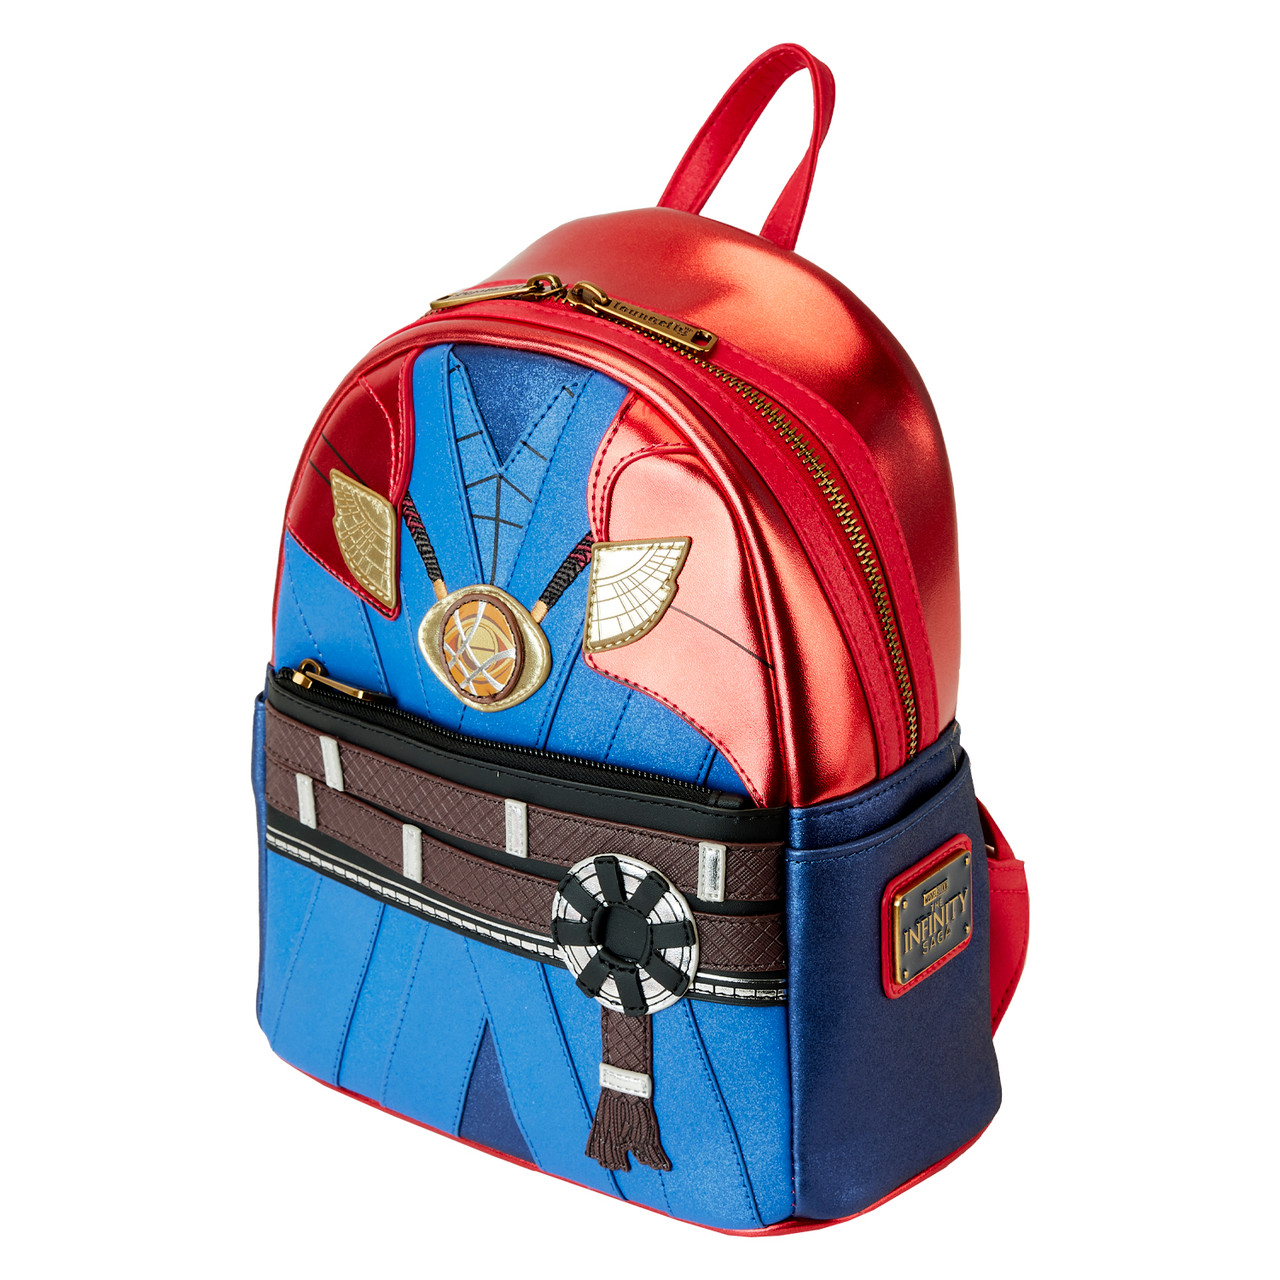 Amazon.com: Marvel Avengers Backpack and Lunch Box Set for Kids - Bundle  with Superhero Backpack and Lunch Bag Plus Spiderman Stickers and More  (Superhero Backpacks for Boys) : Home & Kitchen